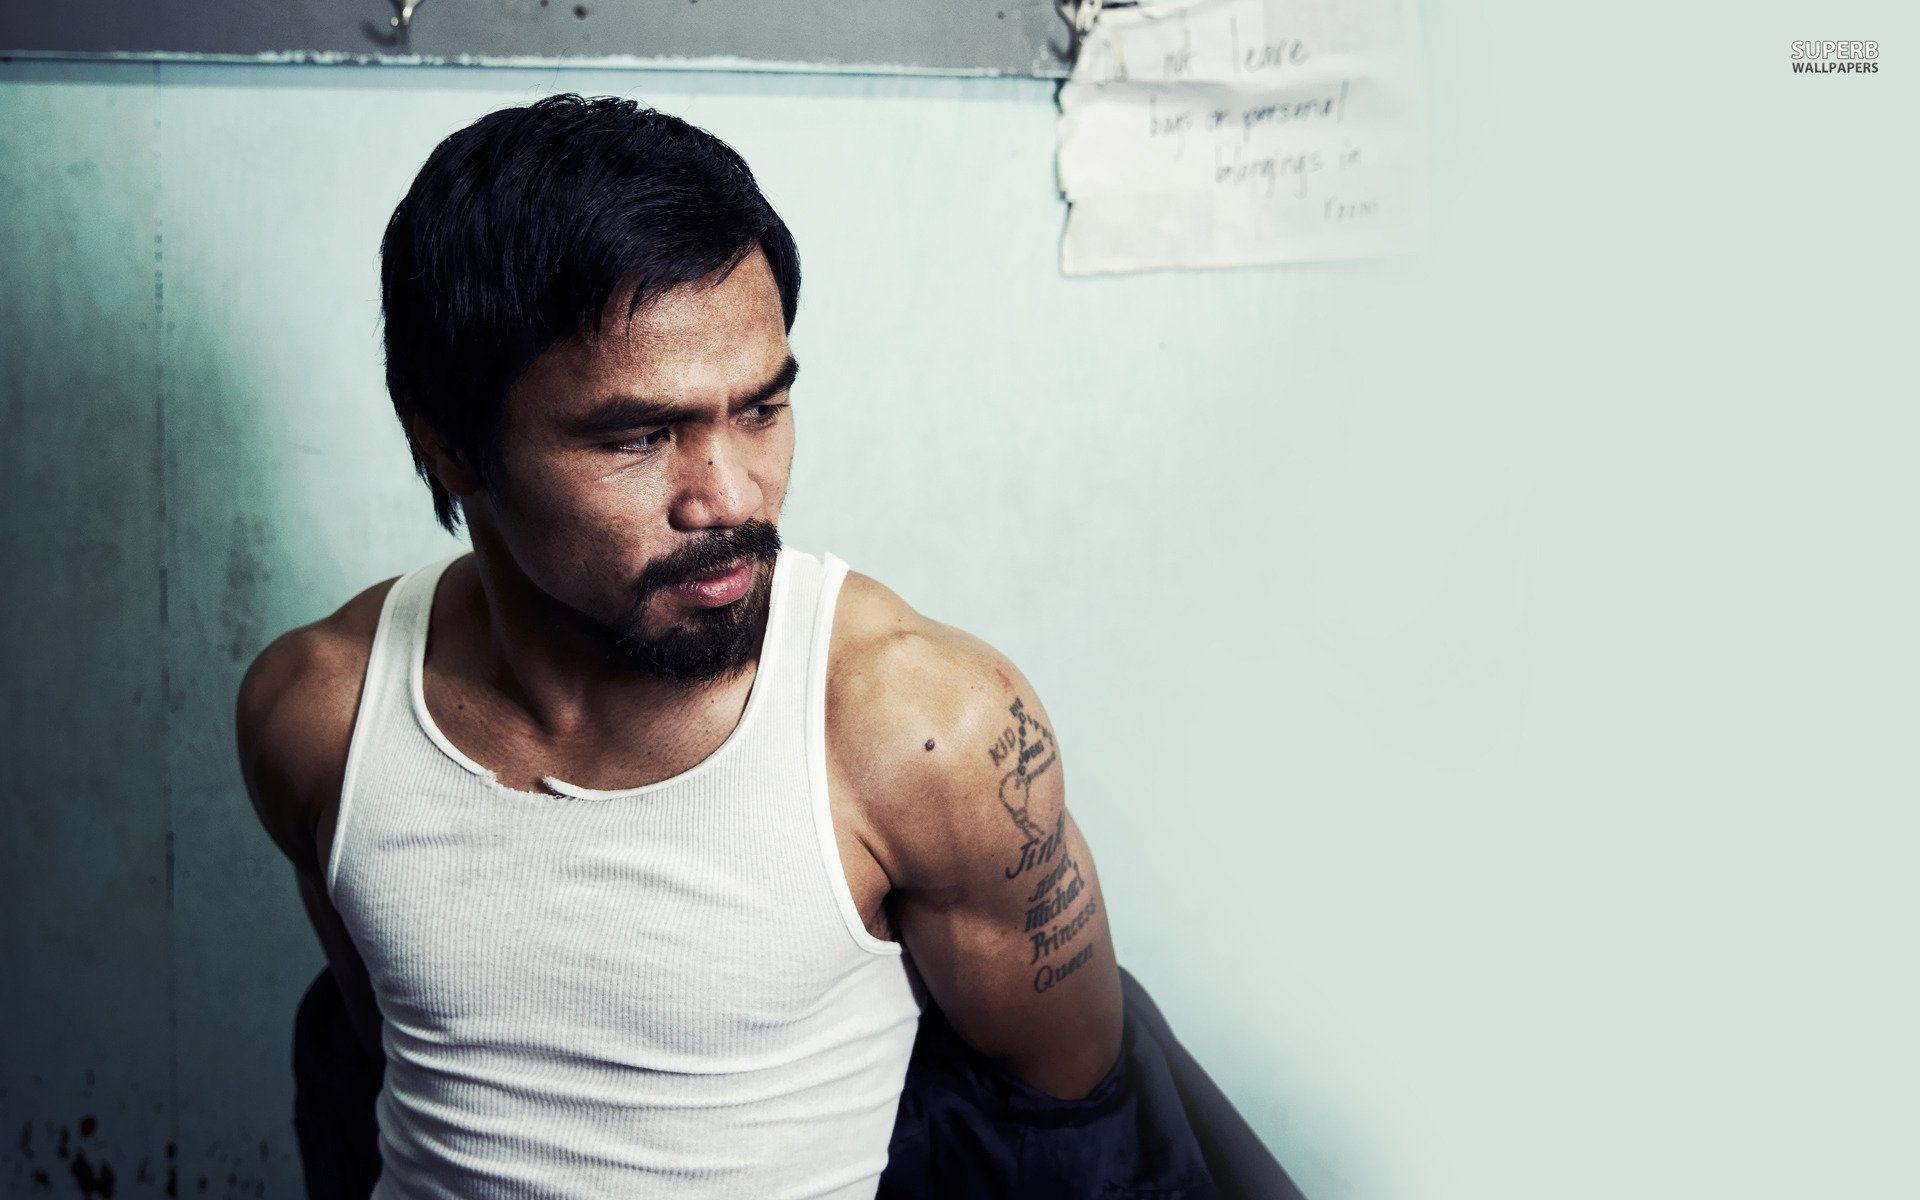 Manny Pacquiao Wallpaper Image Photo Picture Background